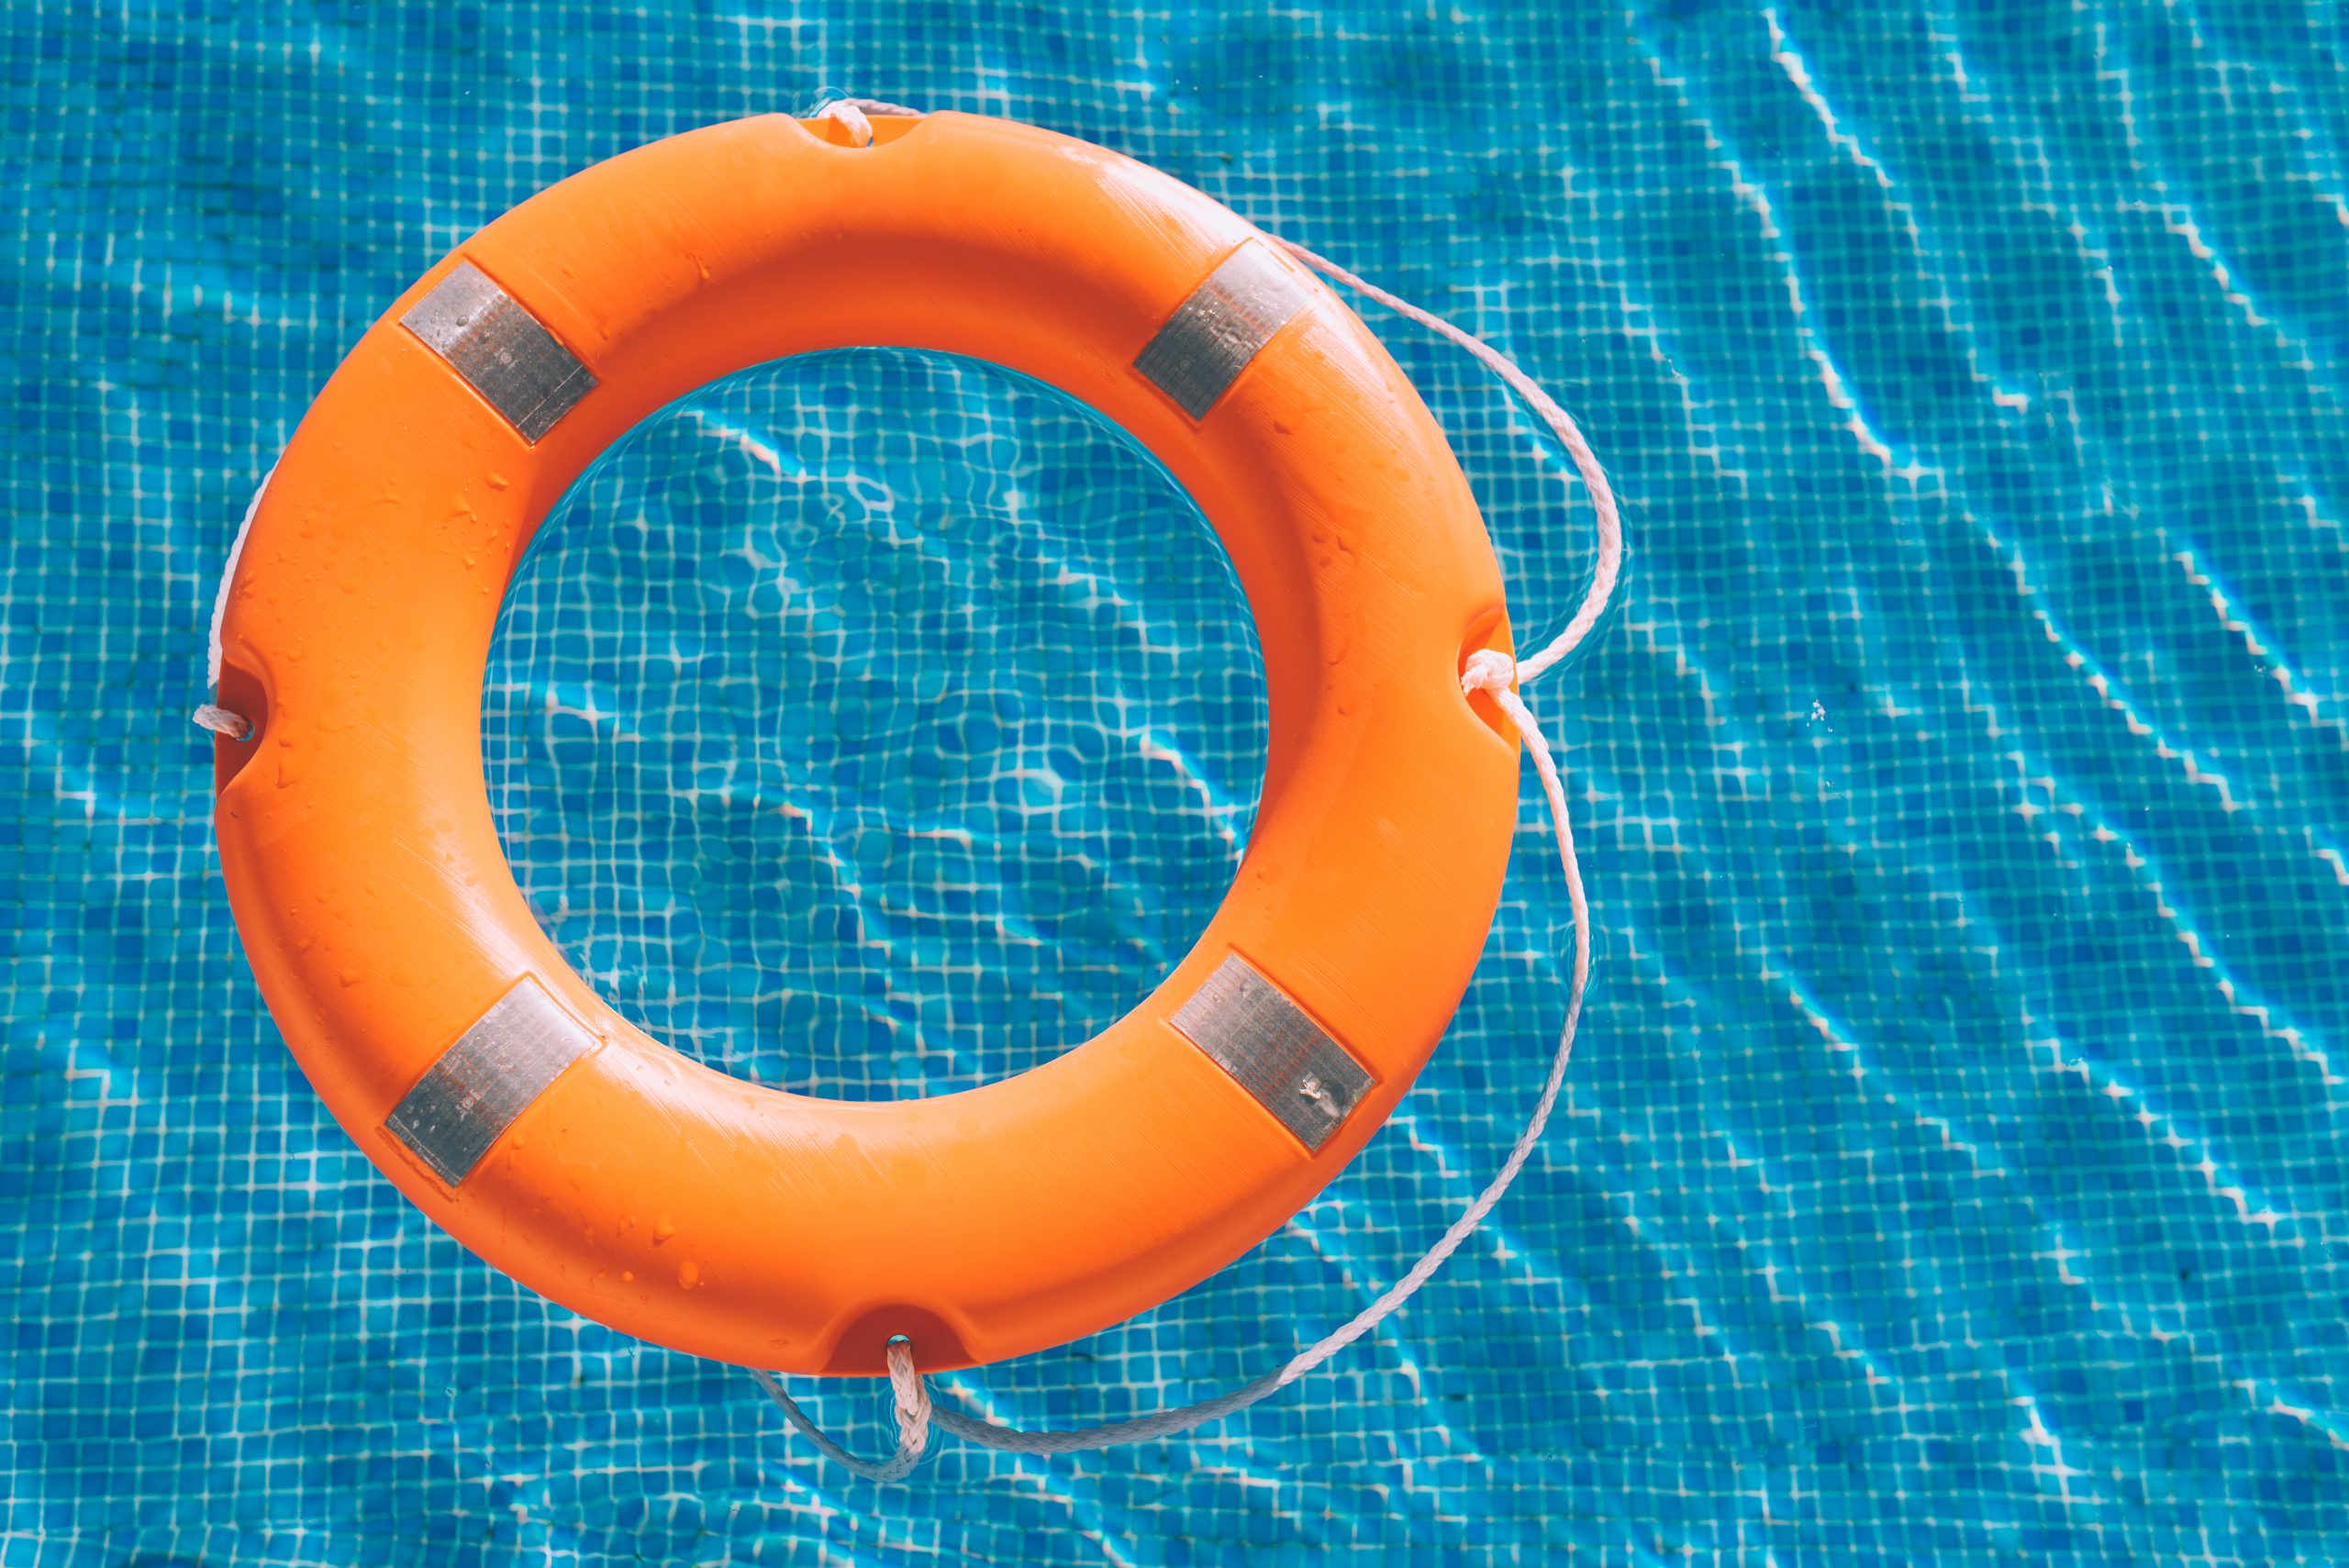 lifesaver-in-the-swimming-pool-vausykx-scaled